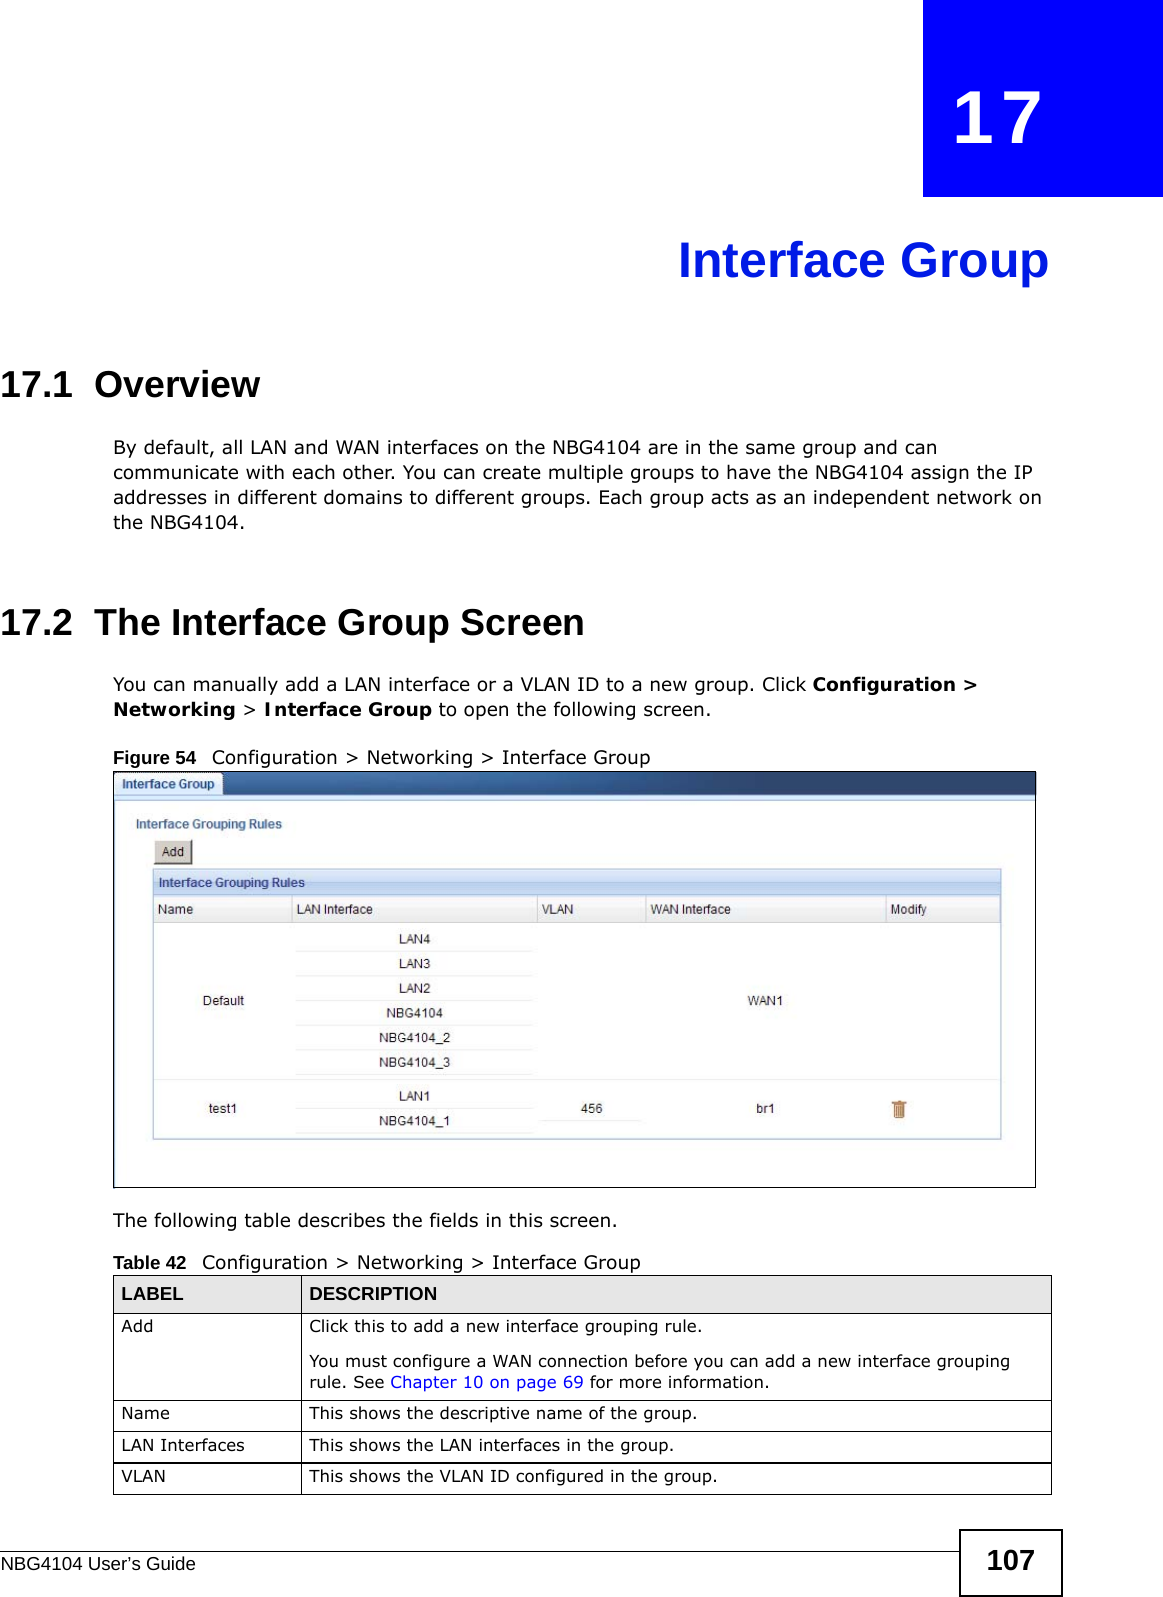 NBG4104 User’s Guide 107CHAPTER   17Interface Group17.1  OverviewBy default, all LAN and WAN interfaces on the NBG4104 are in the same group and can communicate with each other. You can create multiple groups to have the NBG4104 assign the IP addresses in different domains to different groups. Each group acts as an independent network on the NBG4104. 17.2  The Interface Group ScreenYou can manually add a LAN interface or a VLAN ID to a new group. Click Configuration &gt; Networking &gt; Interface Group to open the following screen. Figure 54   Configuration &gt; Networking &gt; Interface Group The following table describes the fields in this screen. Table 42   Configuration &gt; Networking &gt; Interface GroupLABEL DESCRIPTIONAdd  Click this to add a new interface grouping rule. You must configure a WAN connection before you can add a new interface grouping rule. See Chapter 10 on page 69 for more information. Name This shows the descriptive name of the group.LAN Interfaces This shows the LAN interfaces in the group.VLAN This shows the VLAN ID configured in the group. 